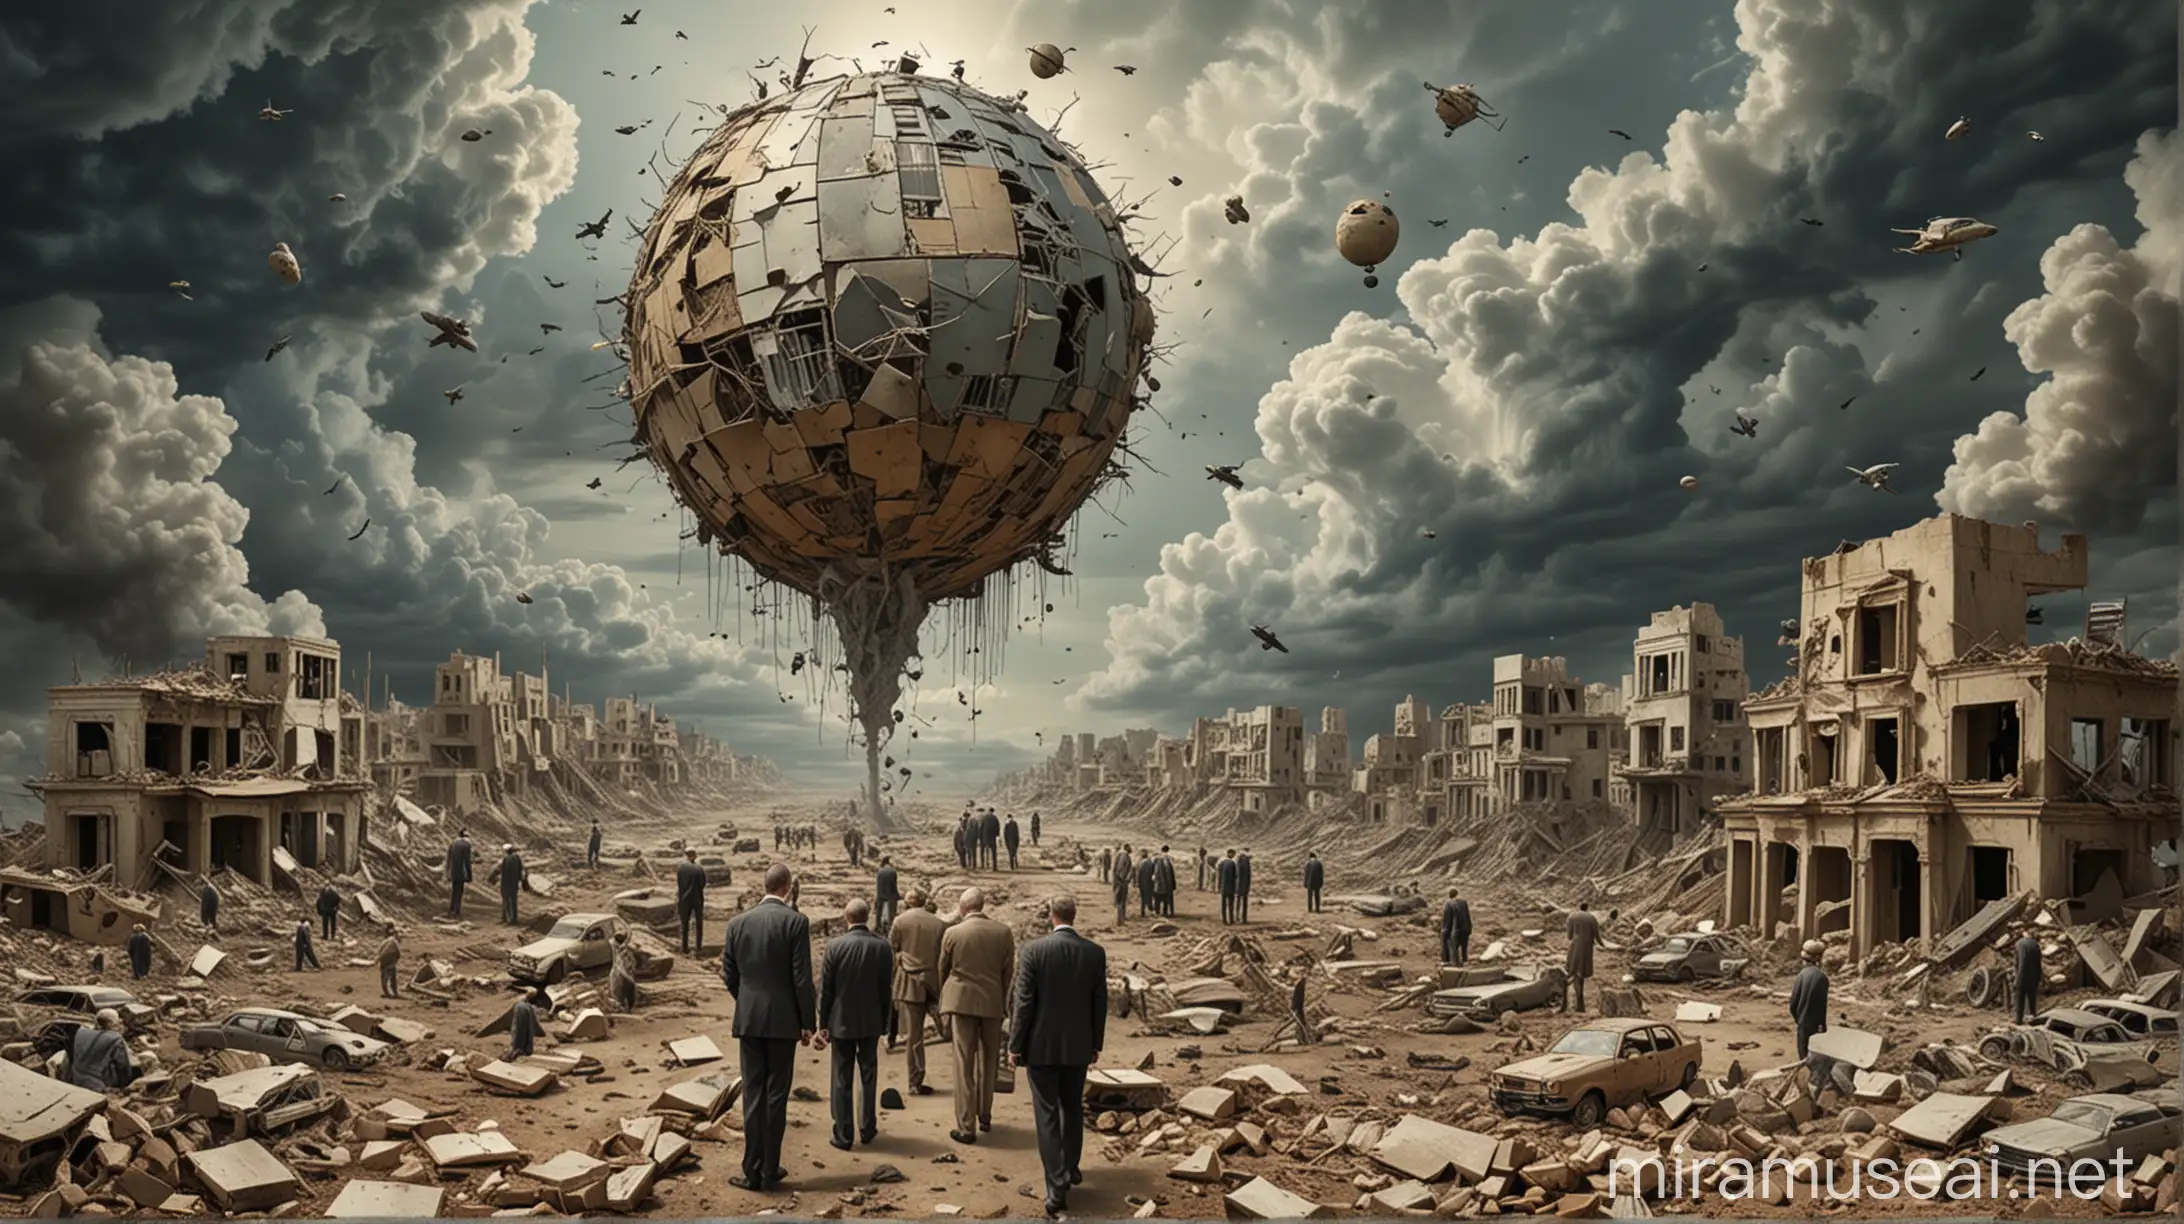 Surrealist Artwork Depicting the Collapse of Neoliberal World Order